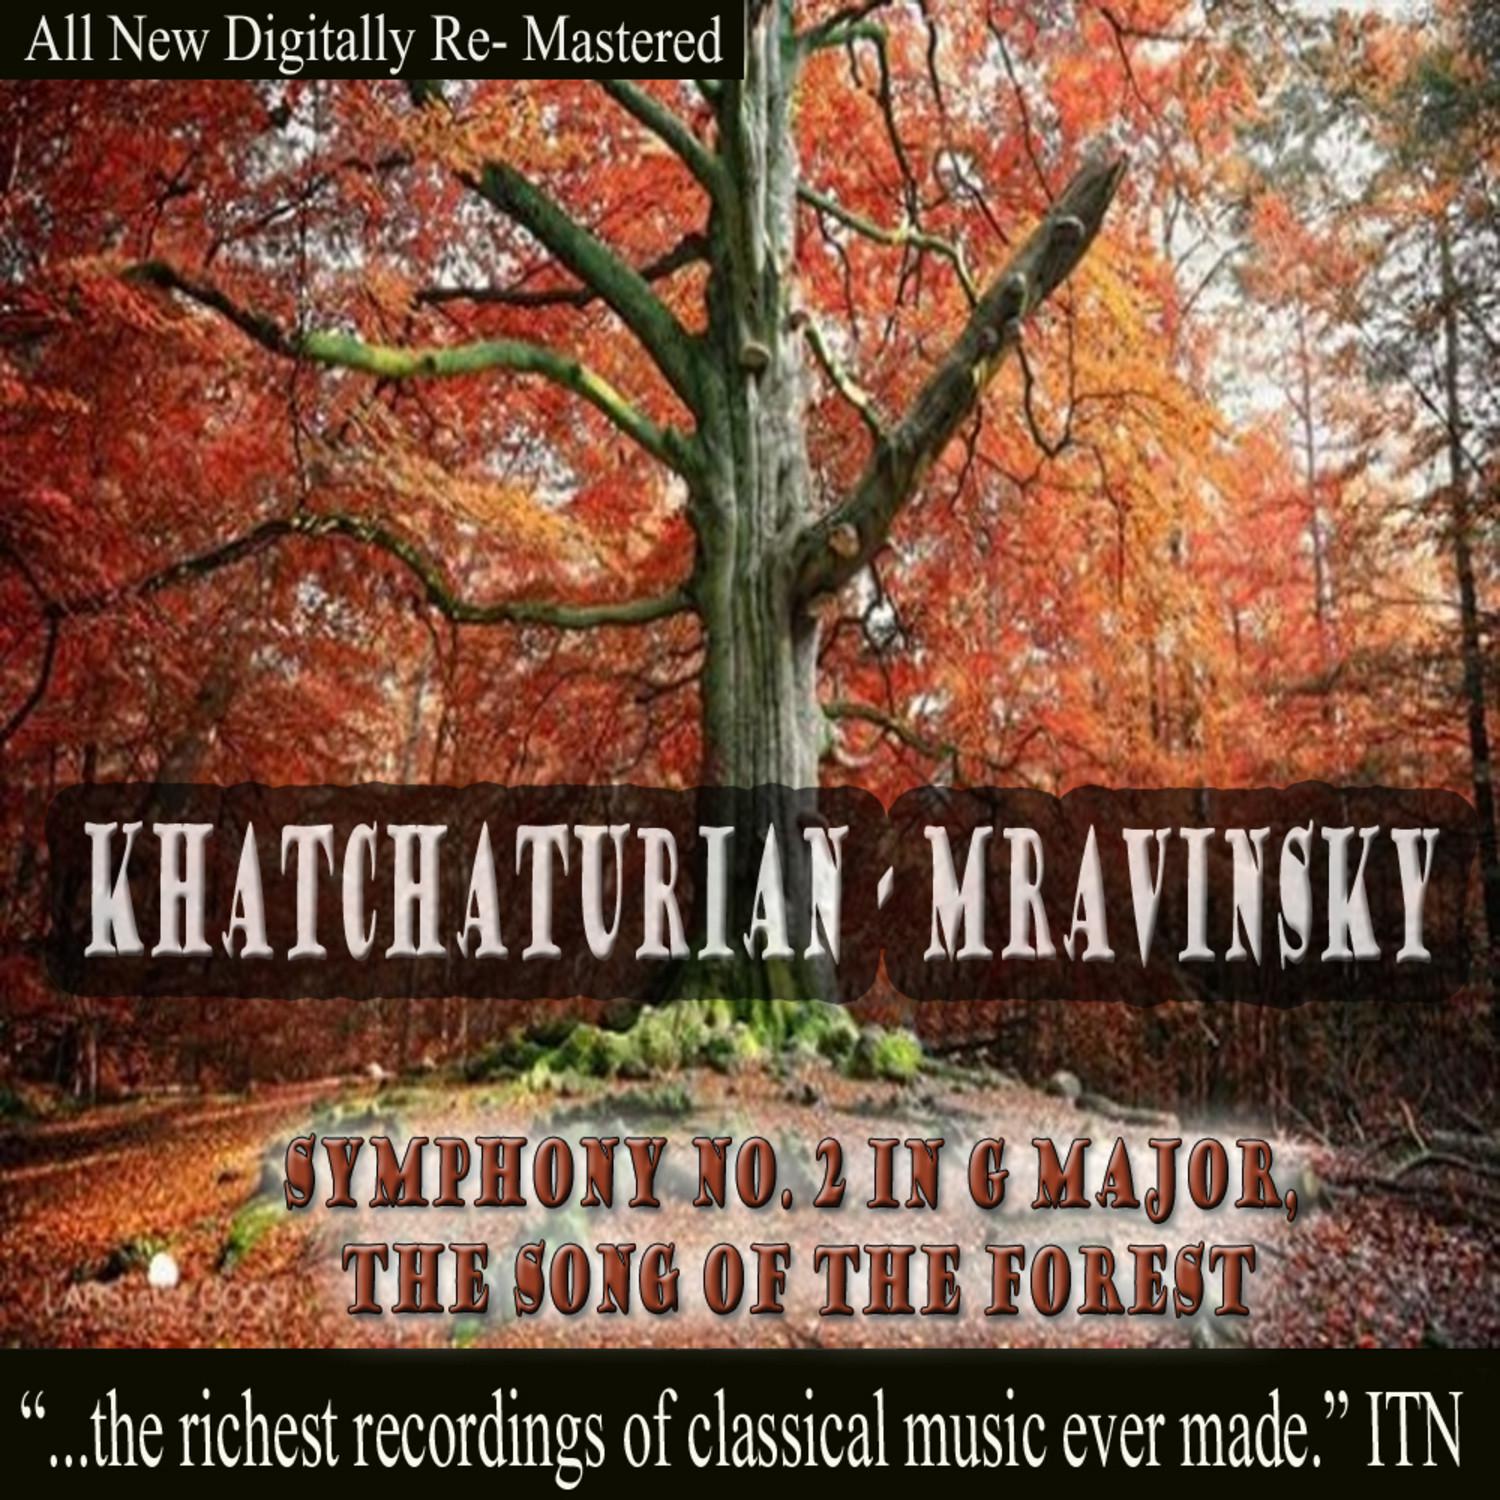 Symphony No. 2 in G Major, The Song of the Forest